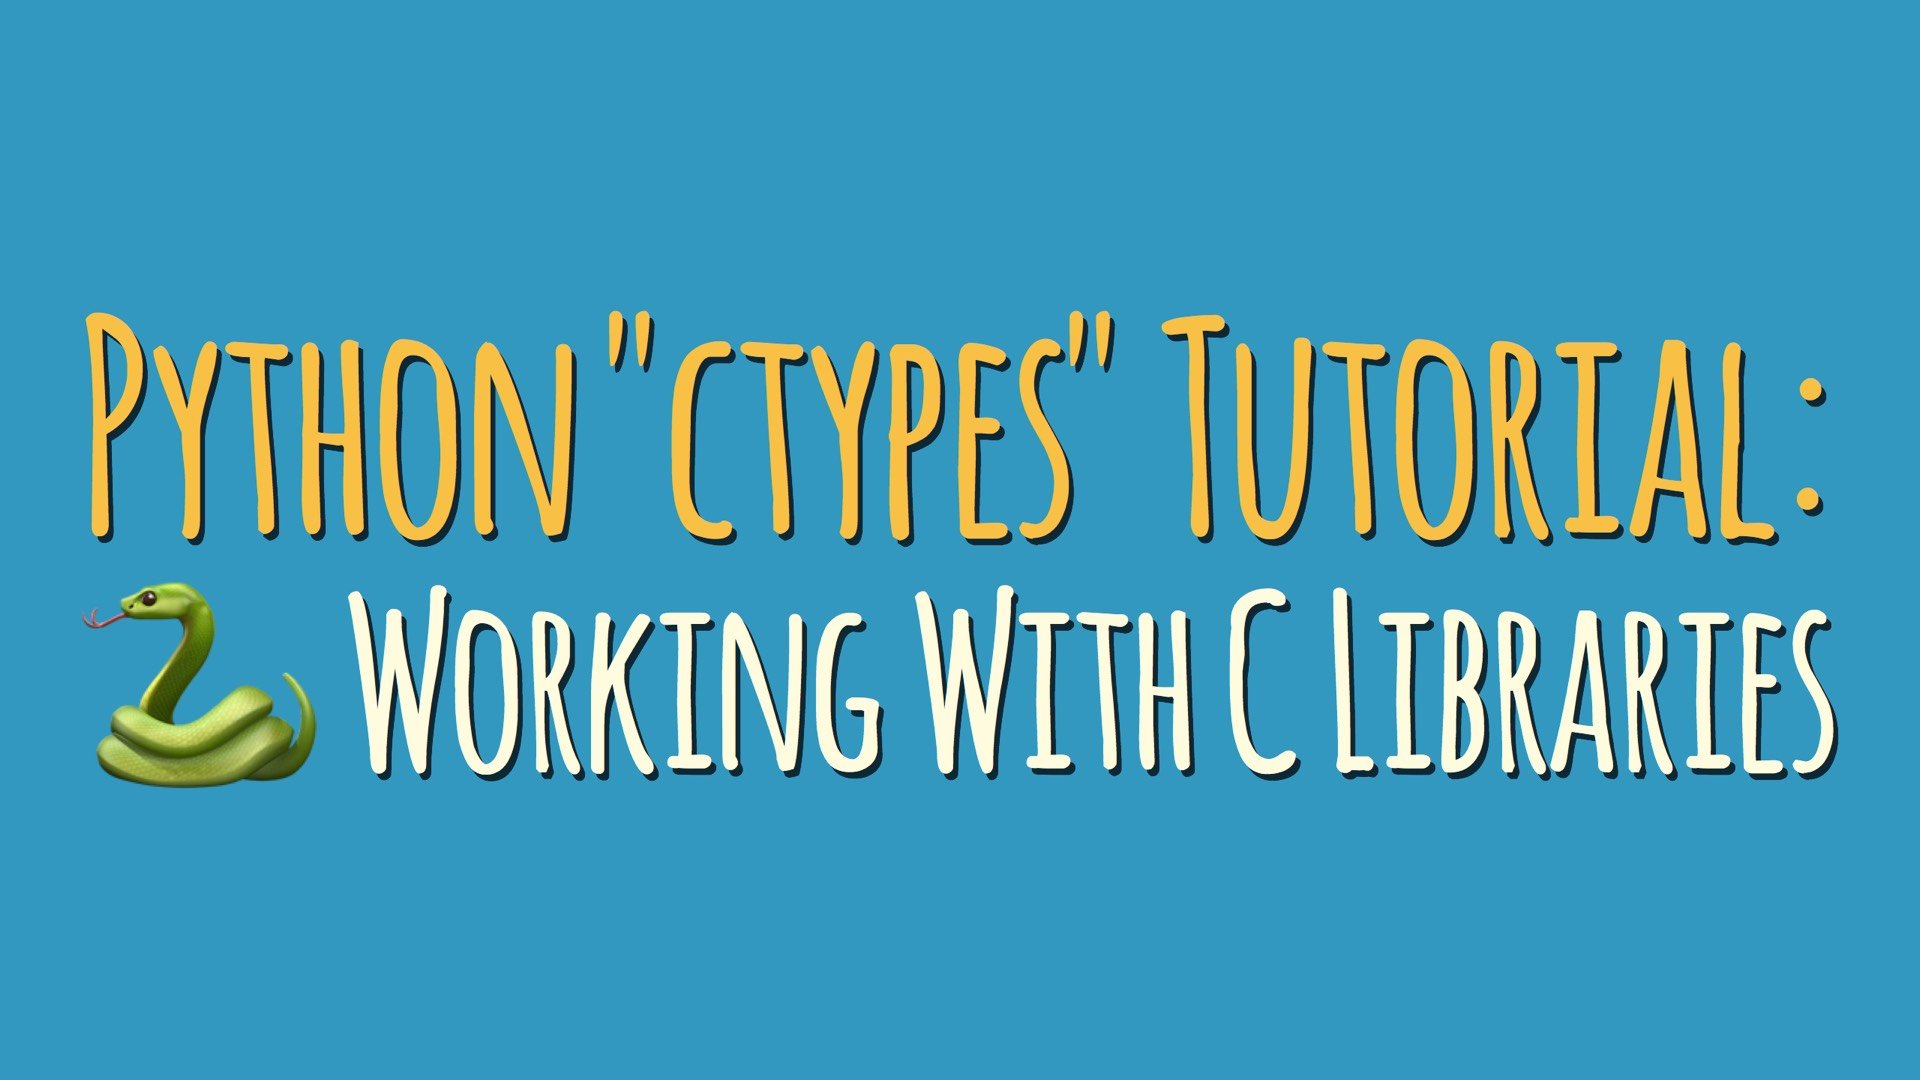 Extending Python With C Libraries and the “ctypes” Module